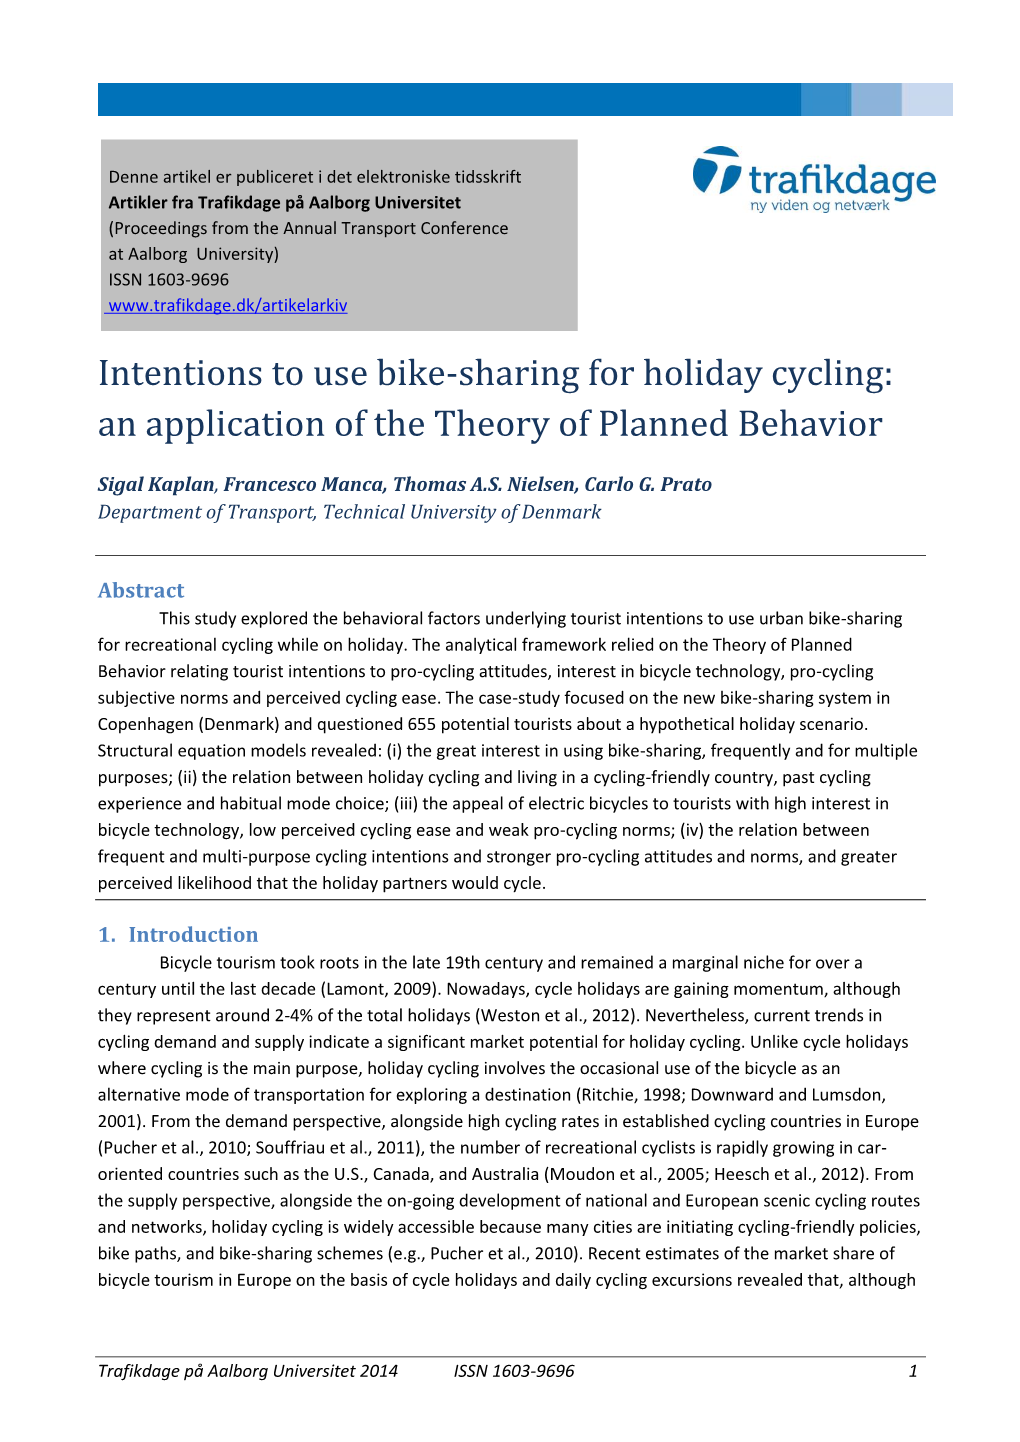 Intentions to Use Bike-Sharing for Holiday Cycling: an Application of the Theory of Planned Behavior